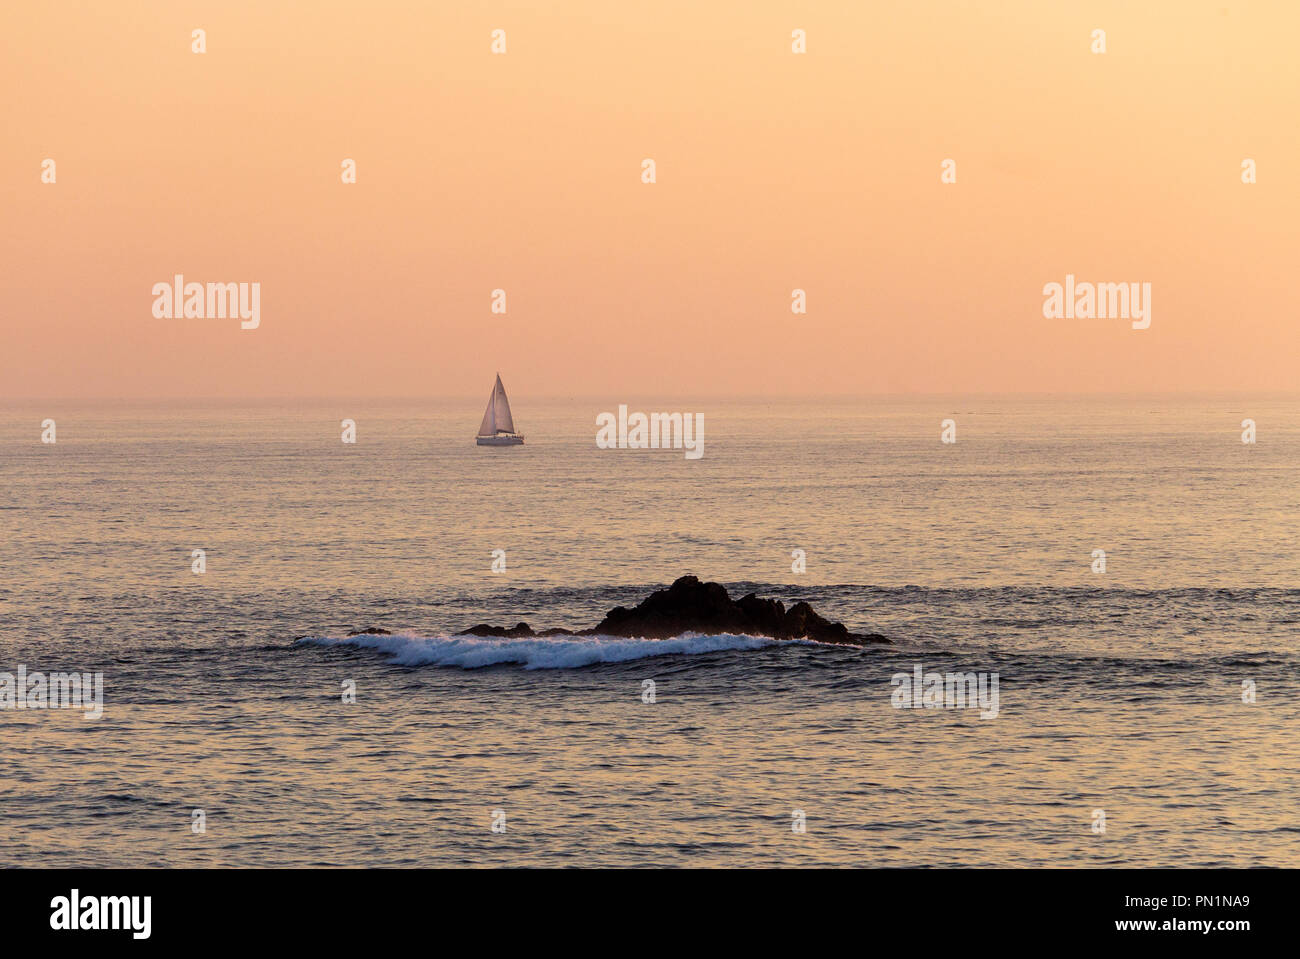 A distant sailboat sails along the sea during sunset with some waves crashing on a rock formation, with the orange colored sky in the background. Stock Photo